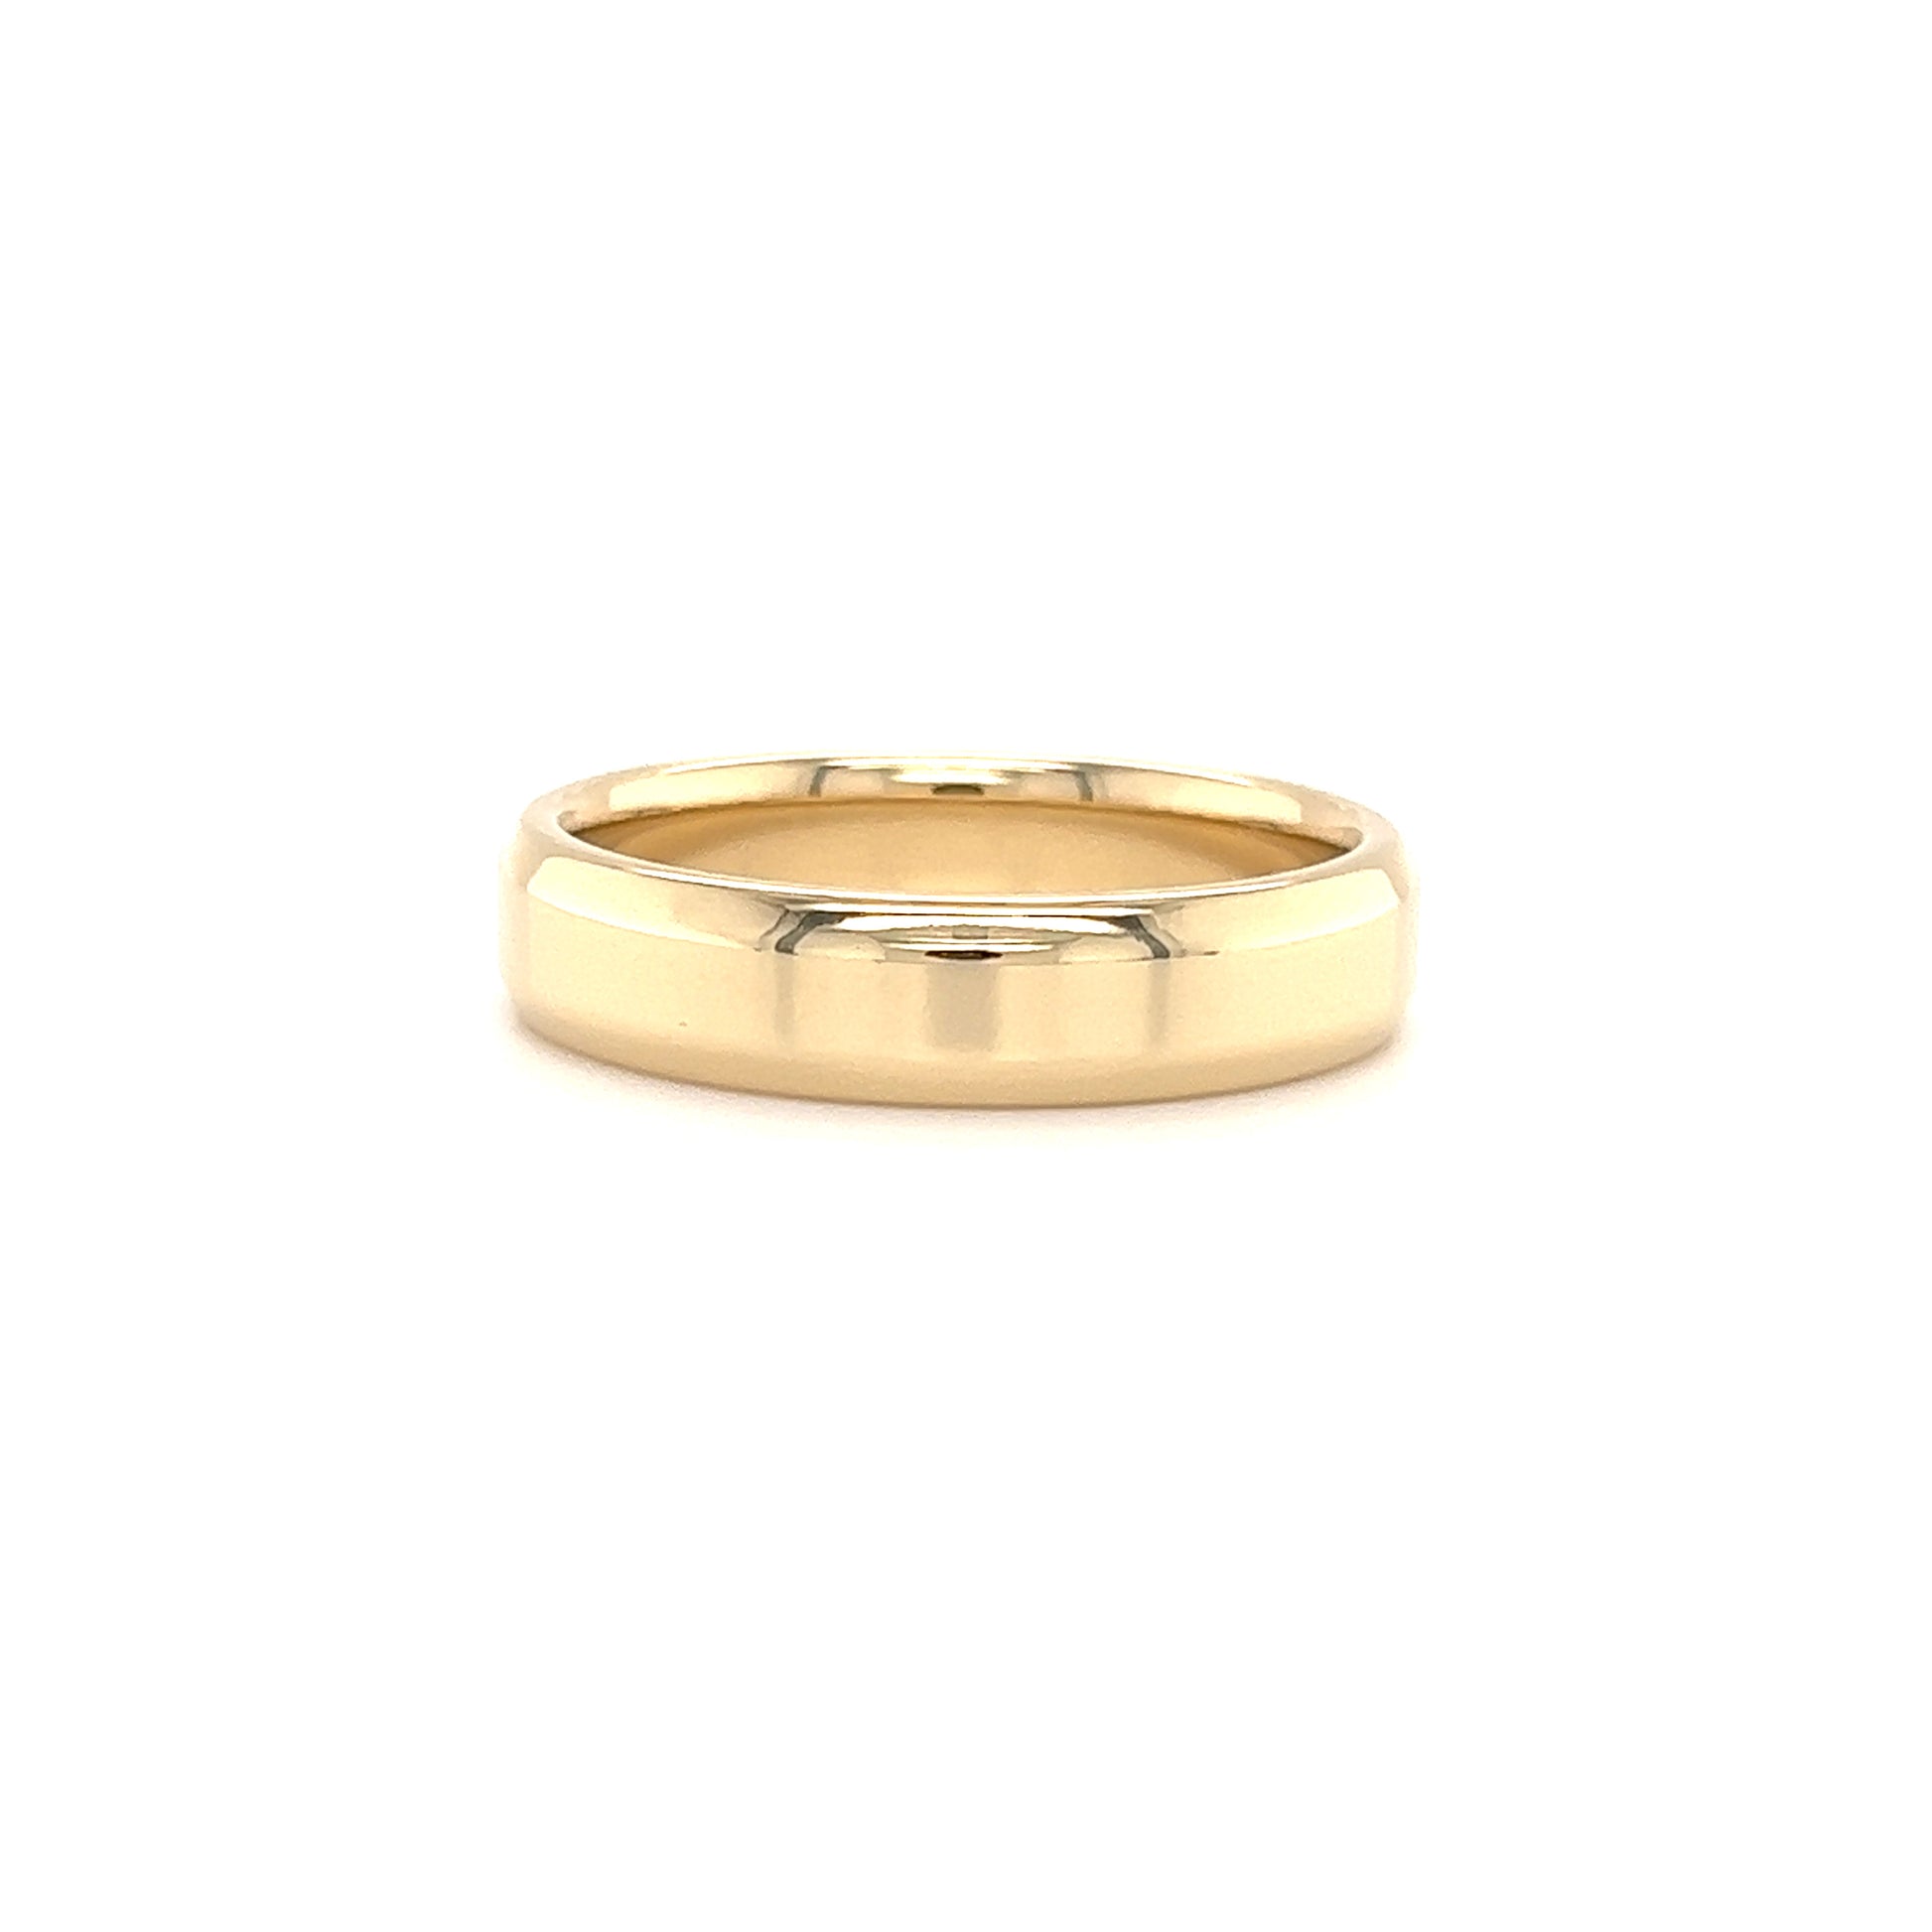 Beveled Edge 5mm Ring with Comfort Fit in 14K Yellow Gold Front View